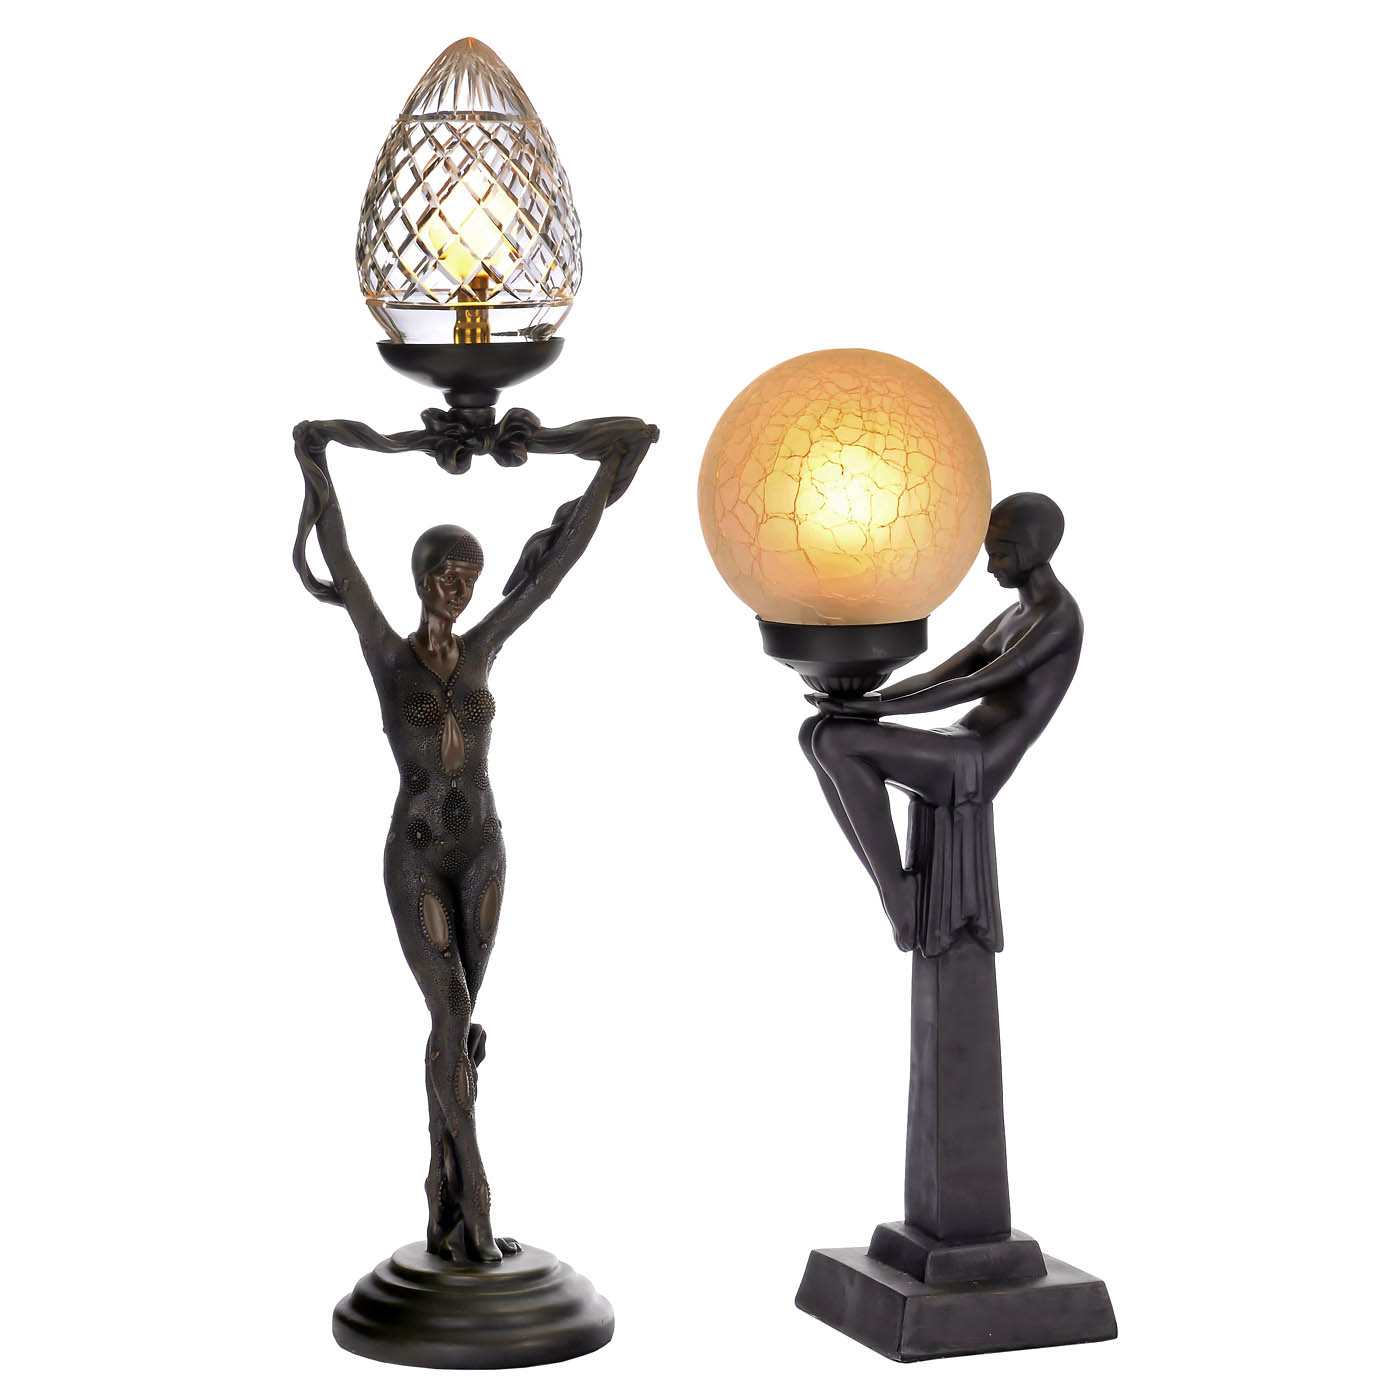 2 Art-Nouveau-Style Candle Holders and 4 Table Lamps, c. 1990 - Image 3 of 5